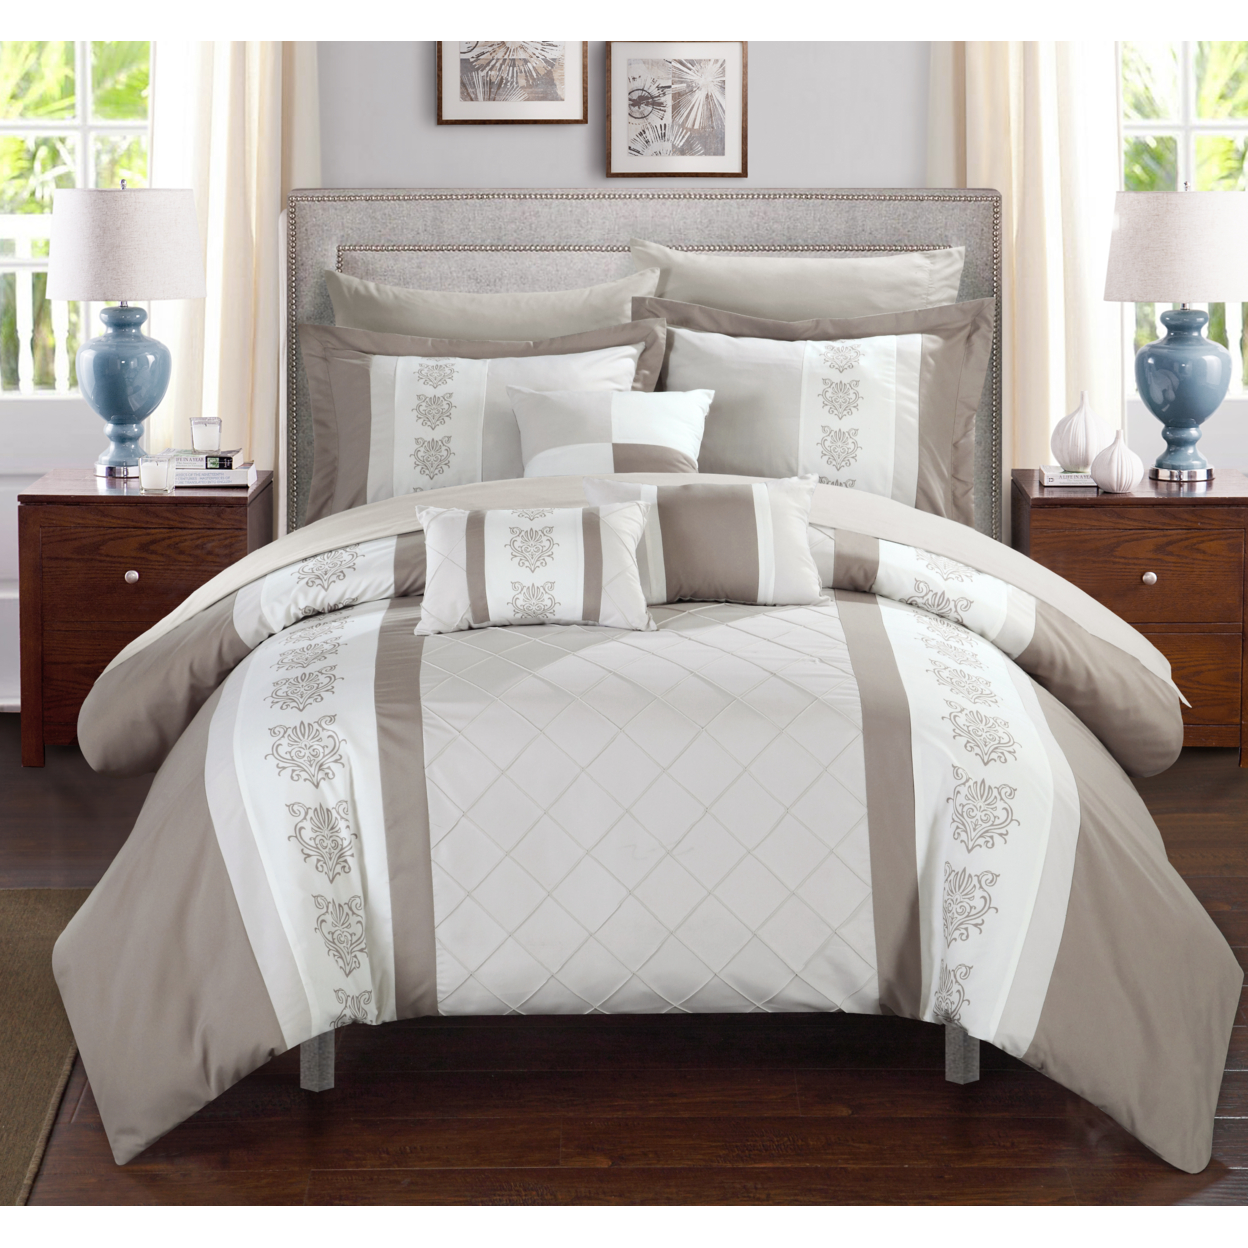 Chic Home 8/10 Piece Adam Pintuck Pieced Color Block Embroidery Bed In A Bag Comforter Set With Sheet Set - Beige, Queen